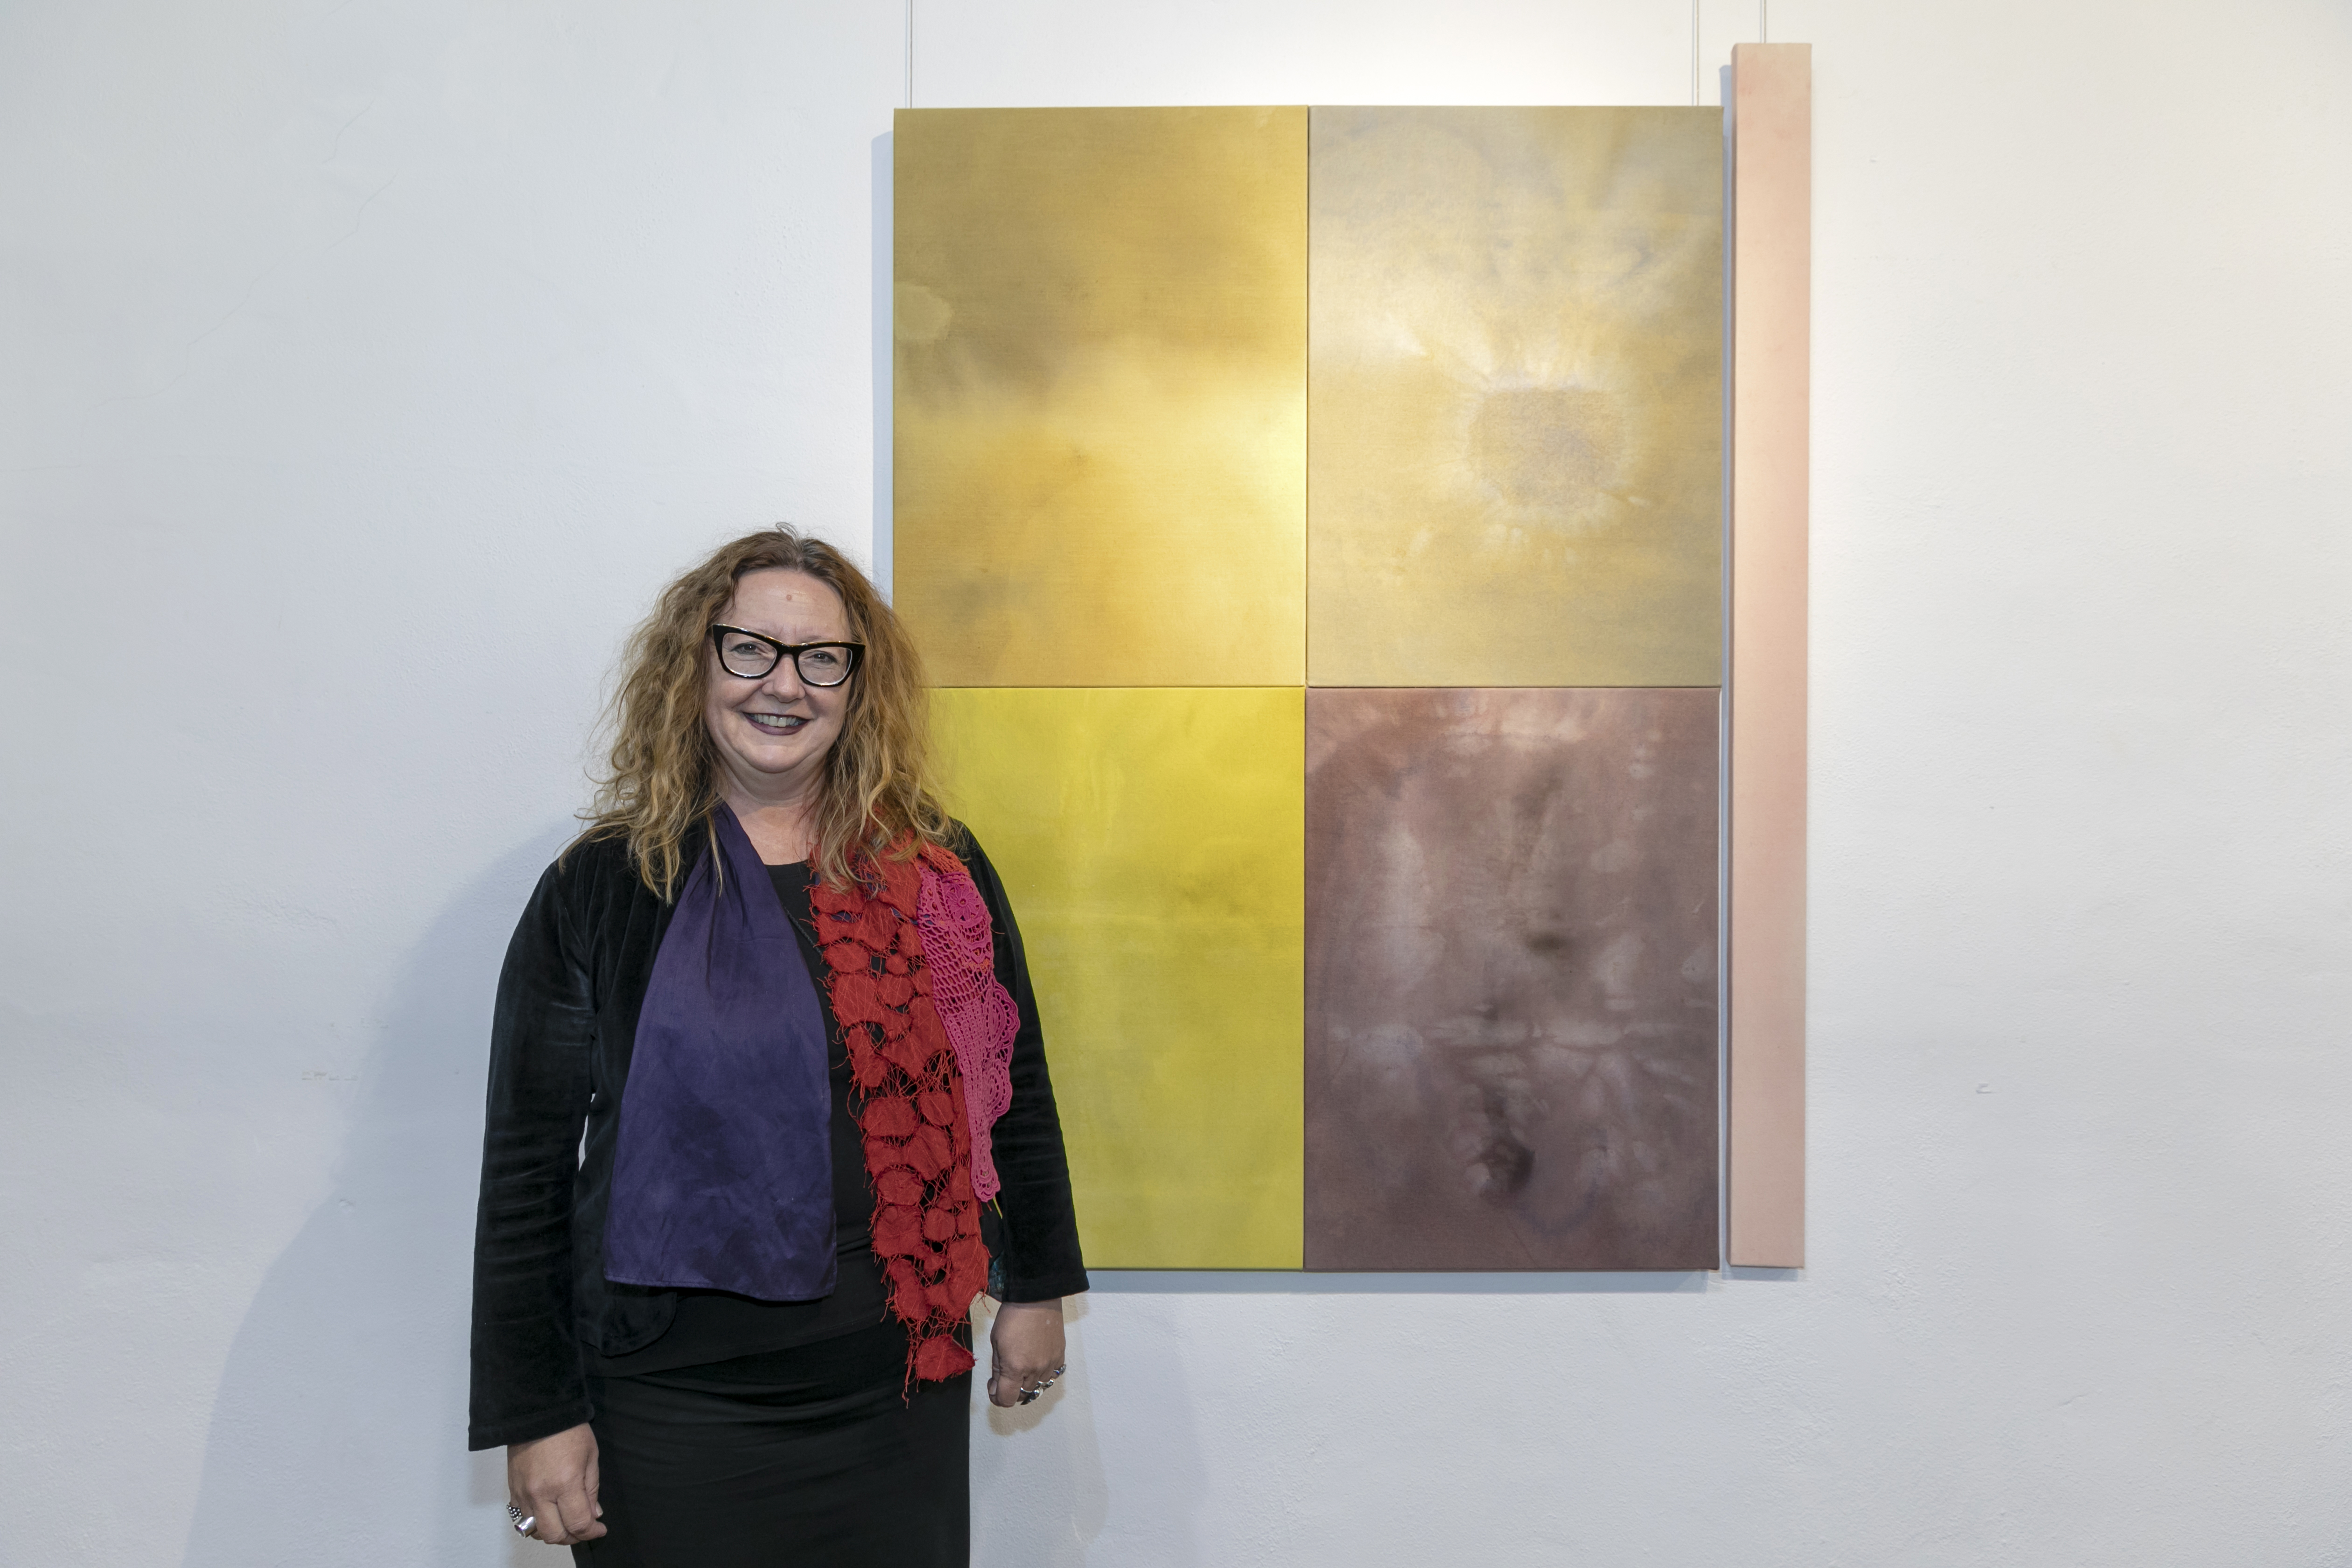 Penny Coss won the 2018 Royal Art Prize with 'Landstain'.